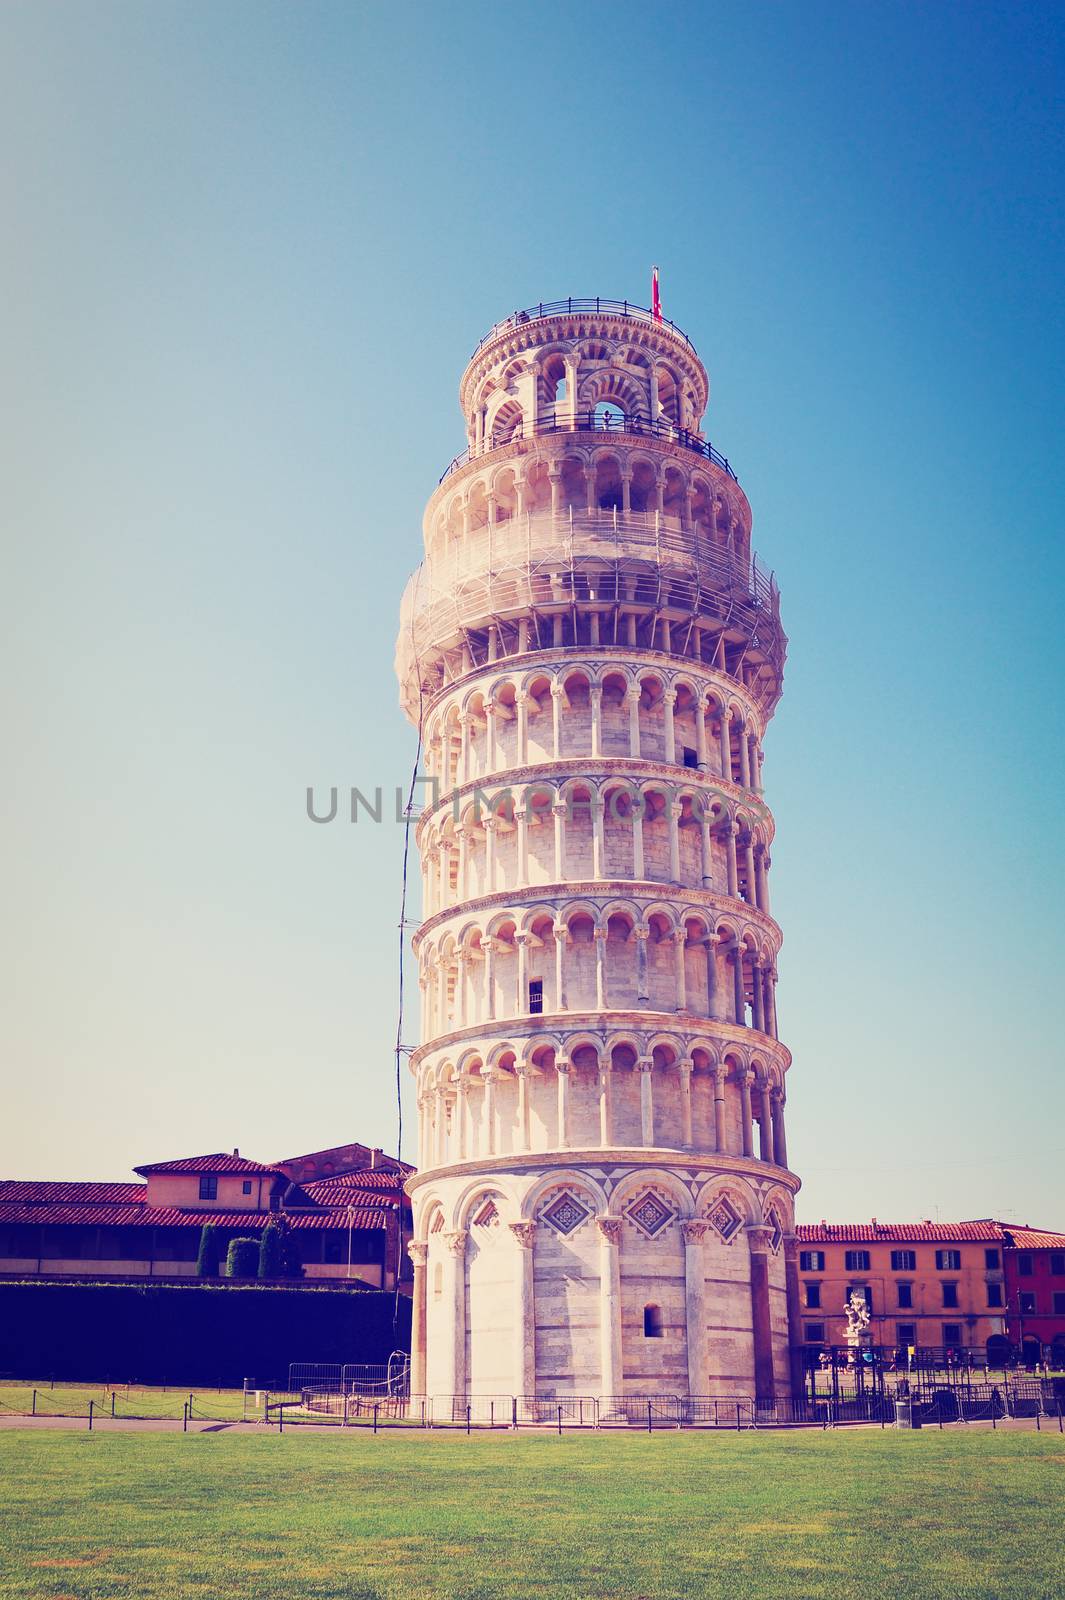 Leaning Tower Of Pisa Under Construction, Instagram Effect